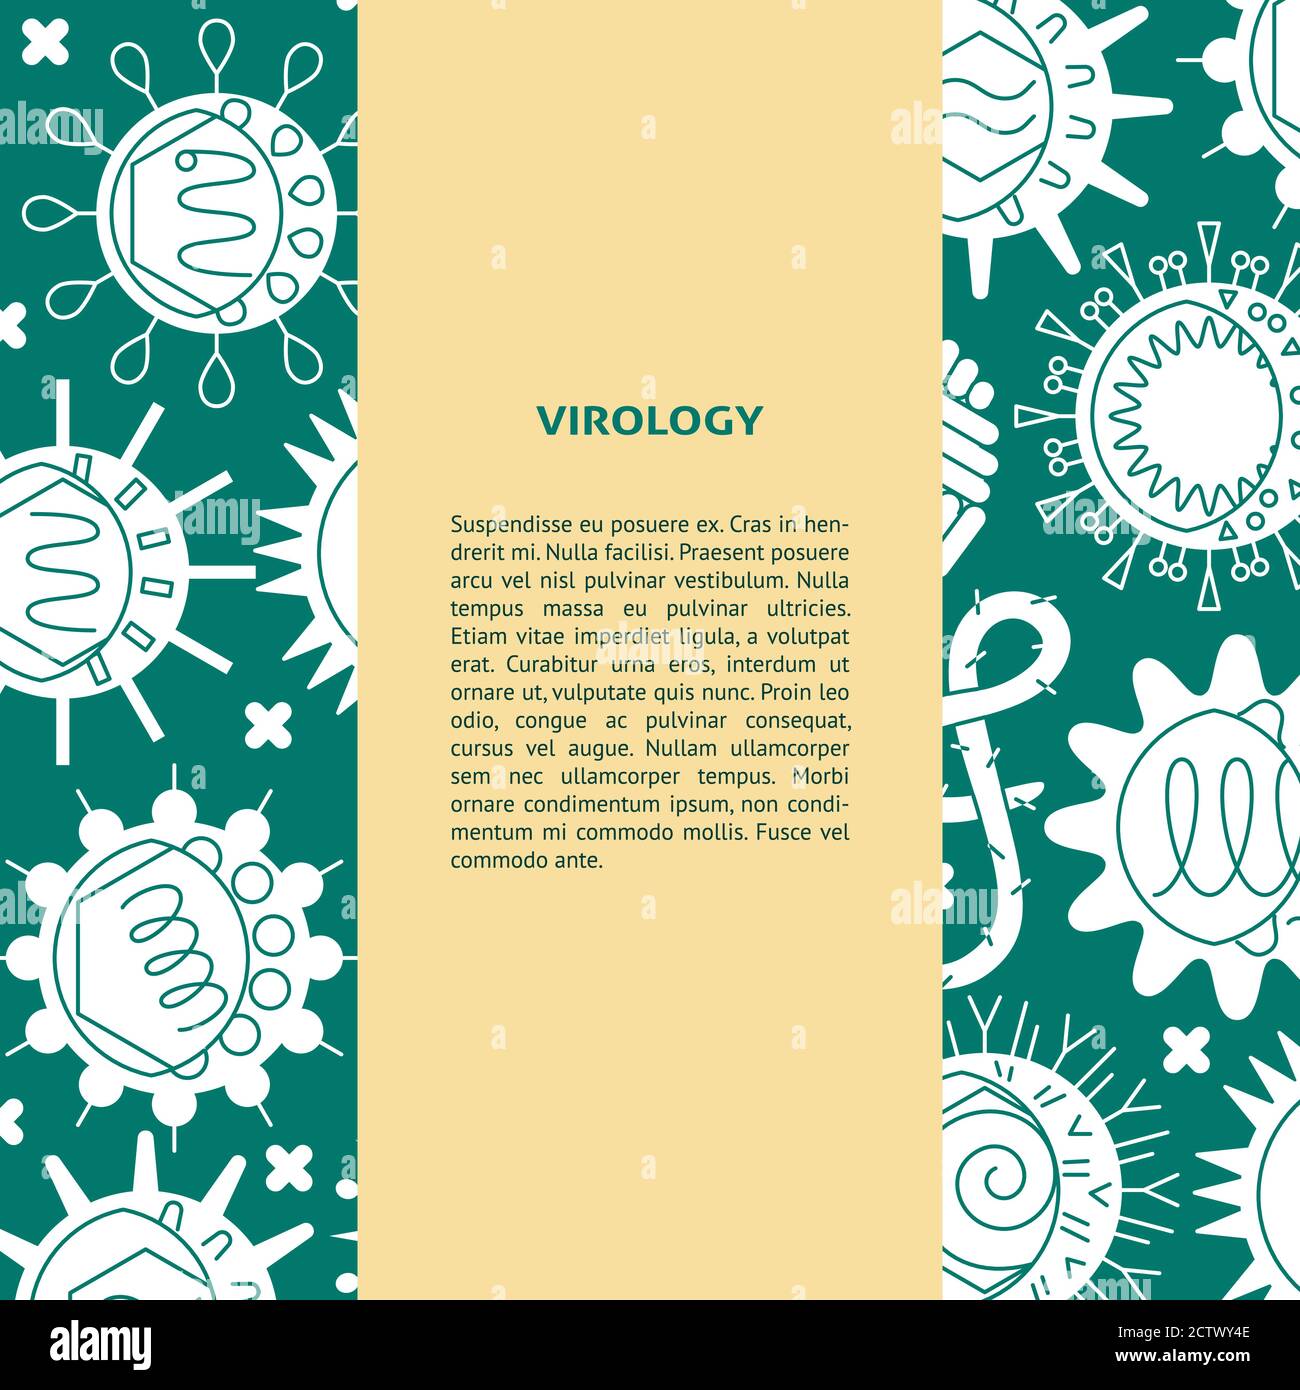 Virology concept banner with place for text Stock Vector